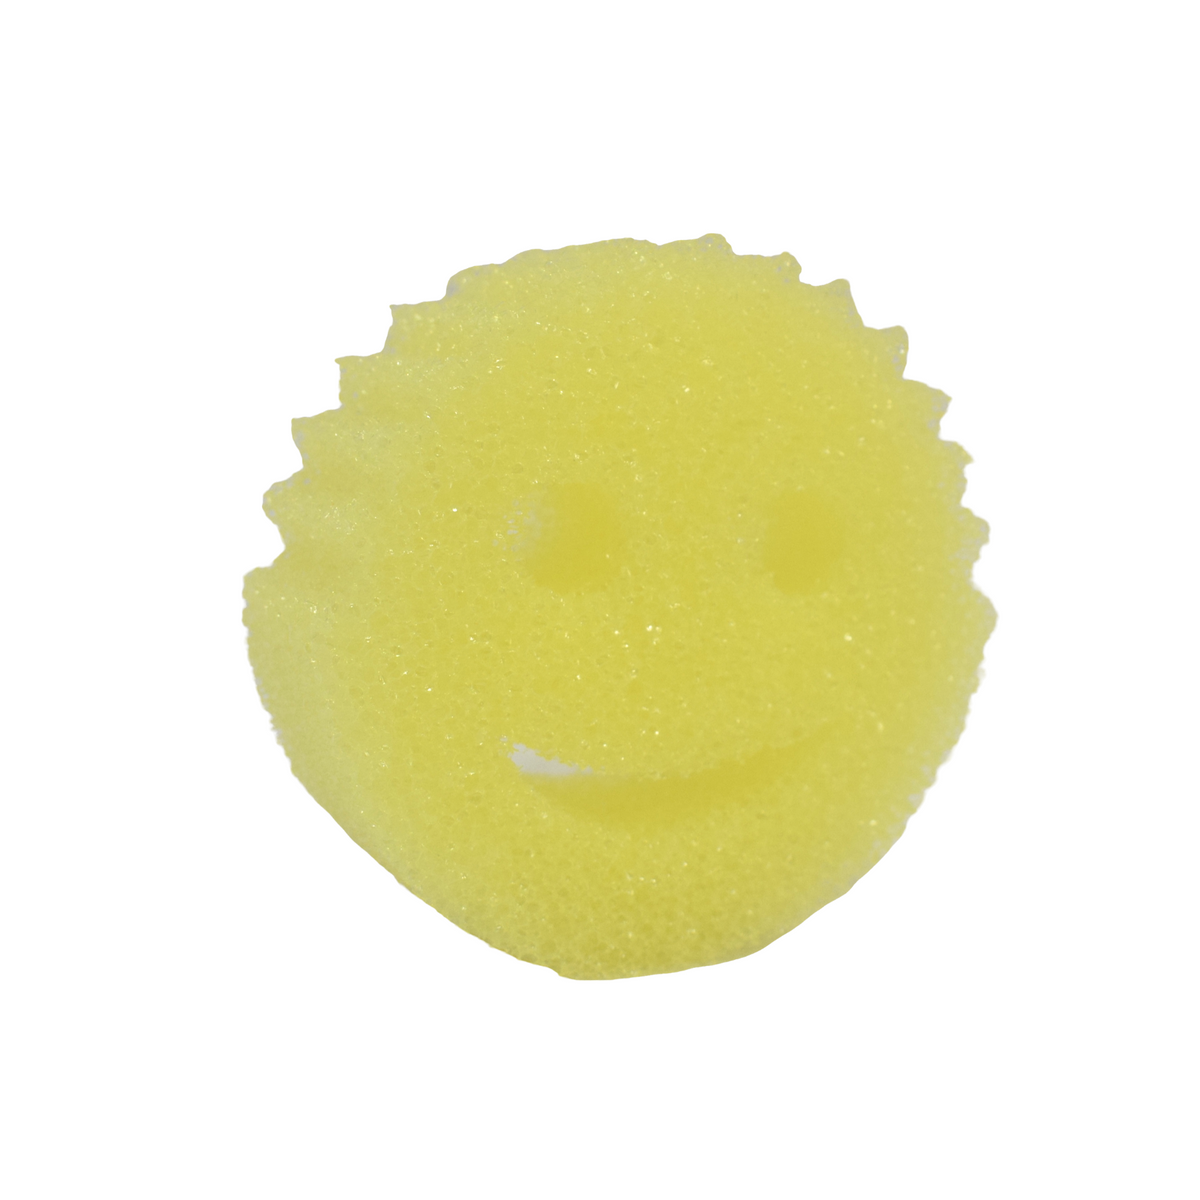 America's favorite sponge is now here in PH. Scrub Daddy is